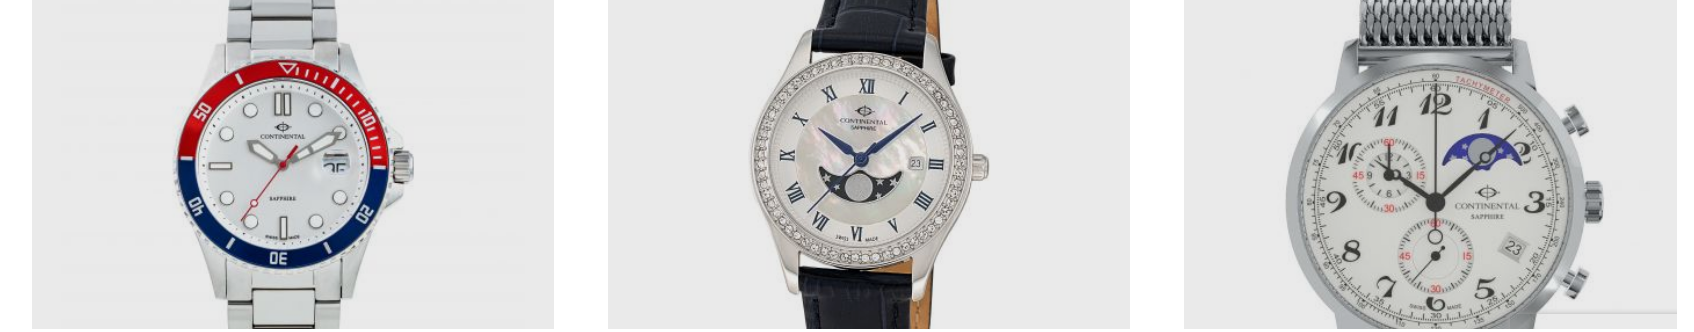 continental-watches-banner